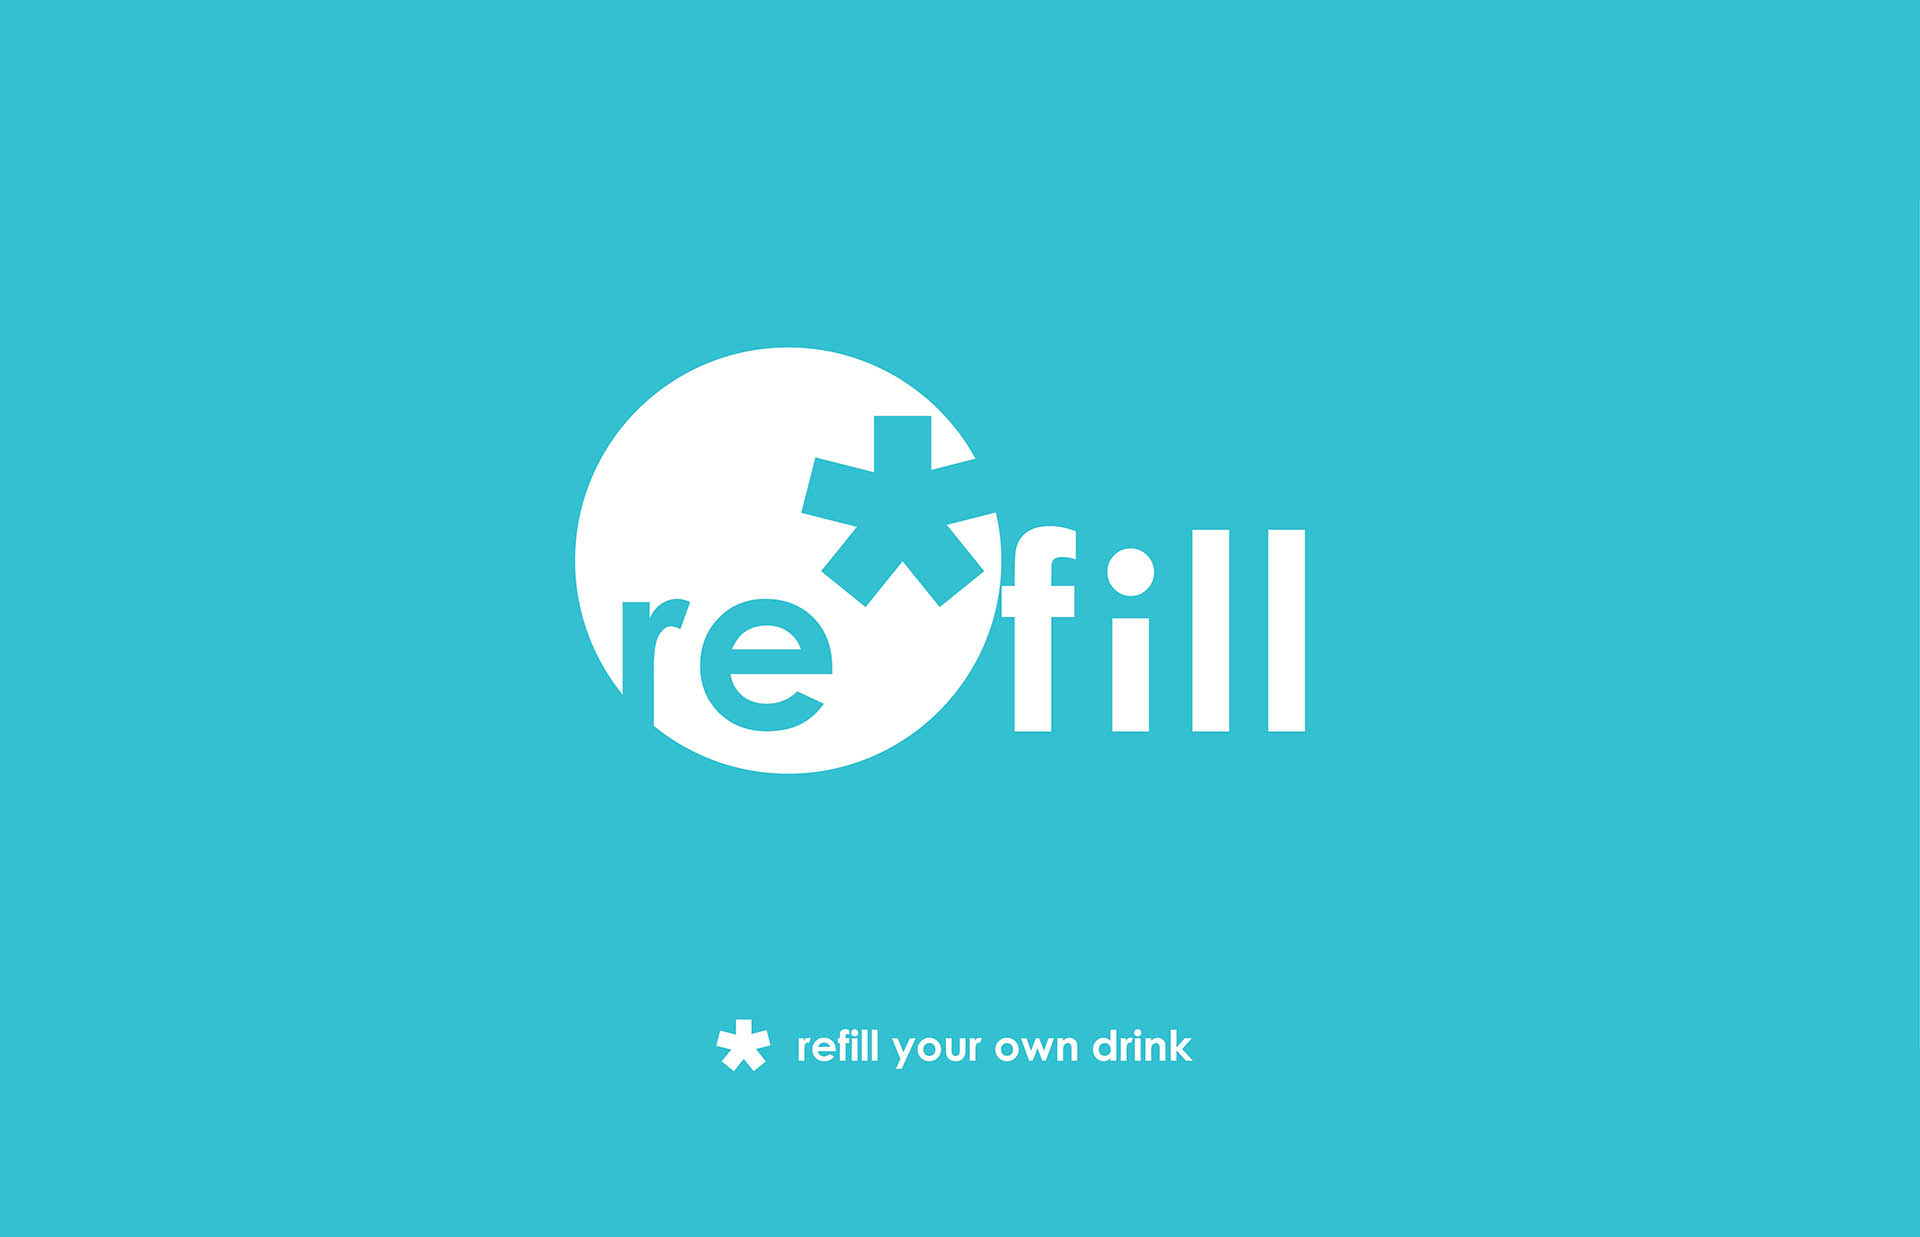 Within Restore you can refill drink containers